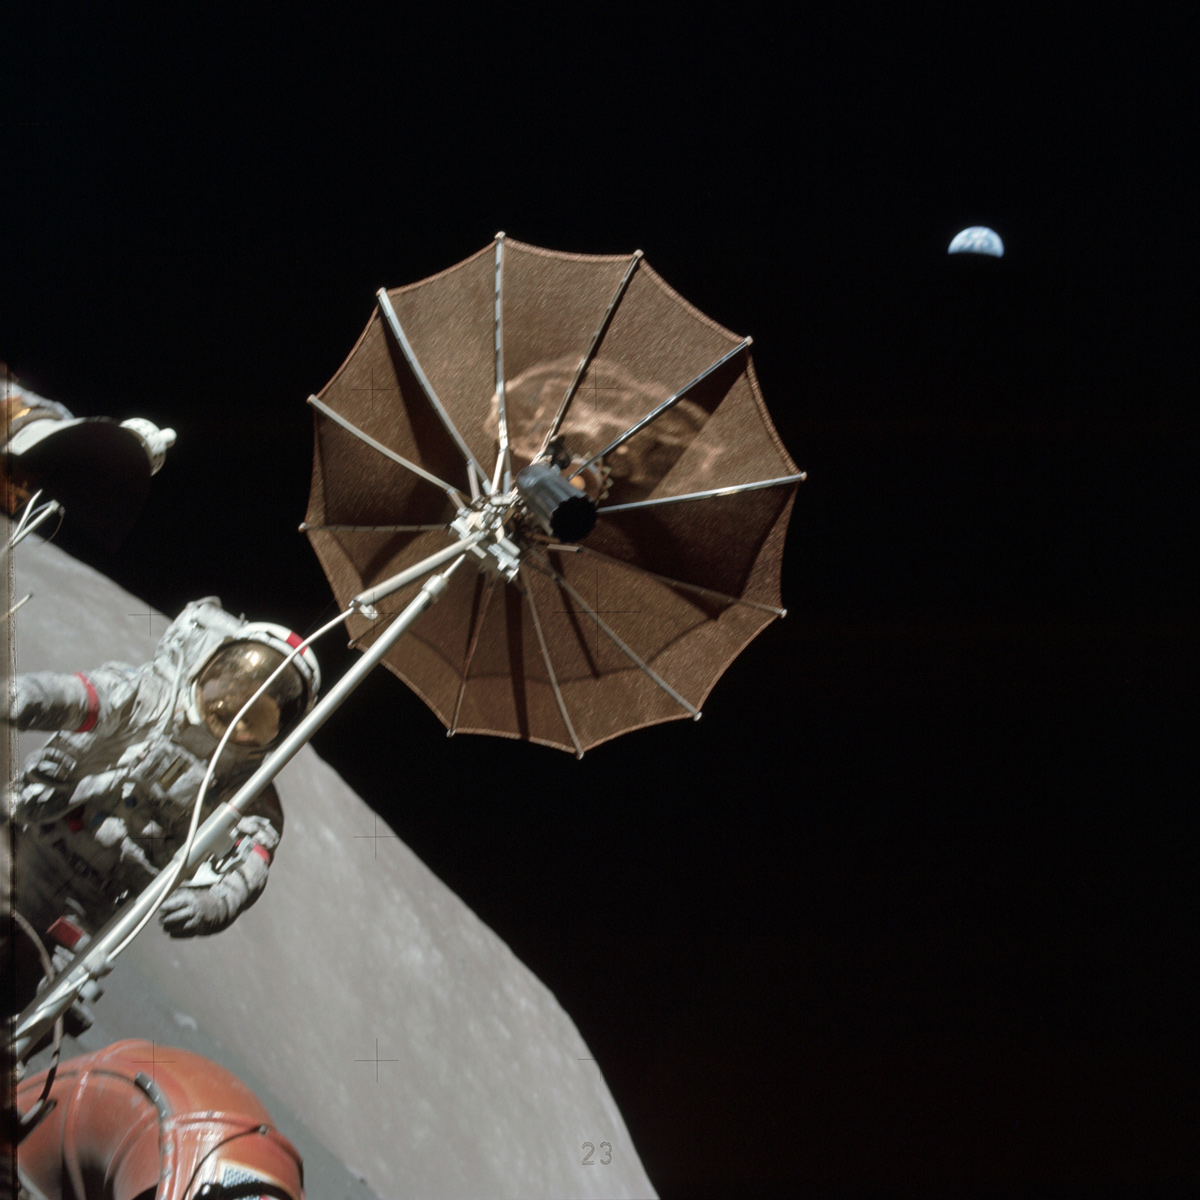 Astronaut on Moon holding antenna with distant Earth in the background